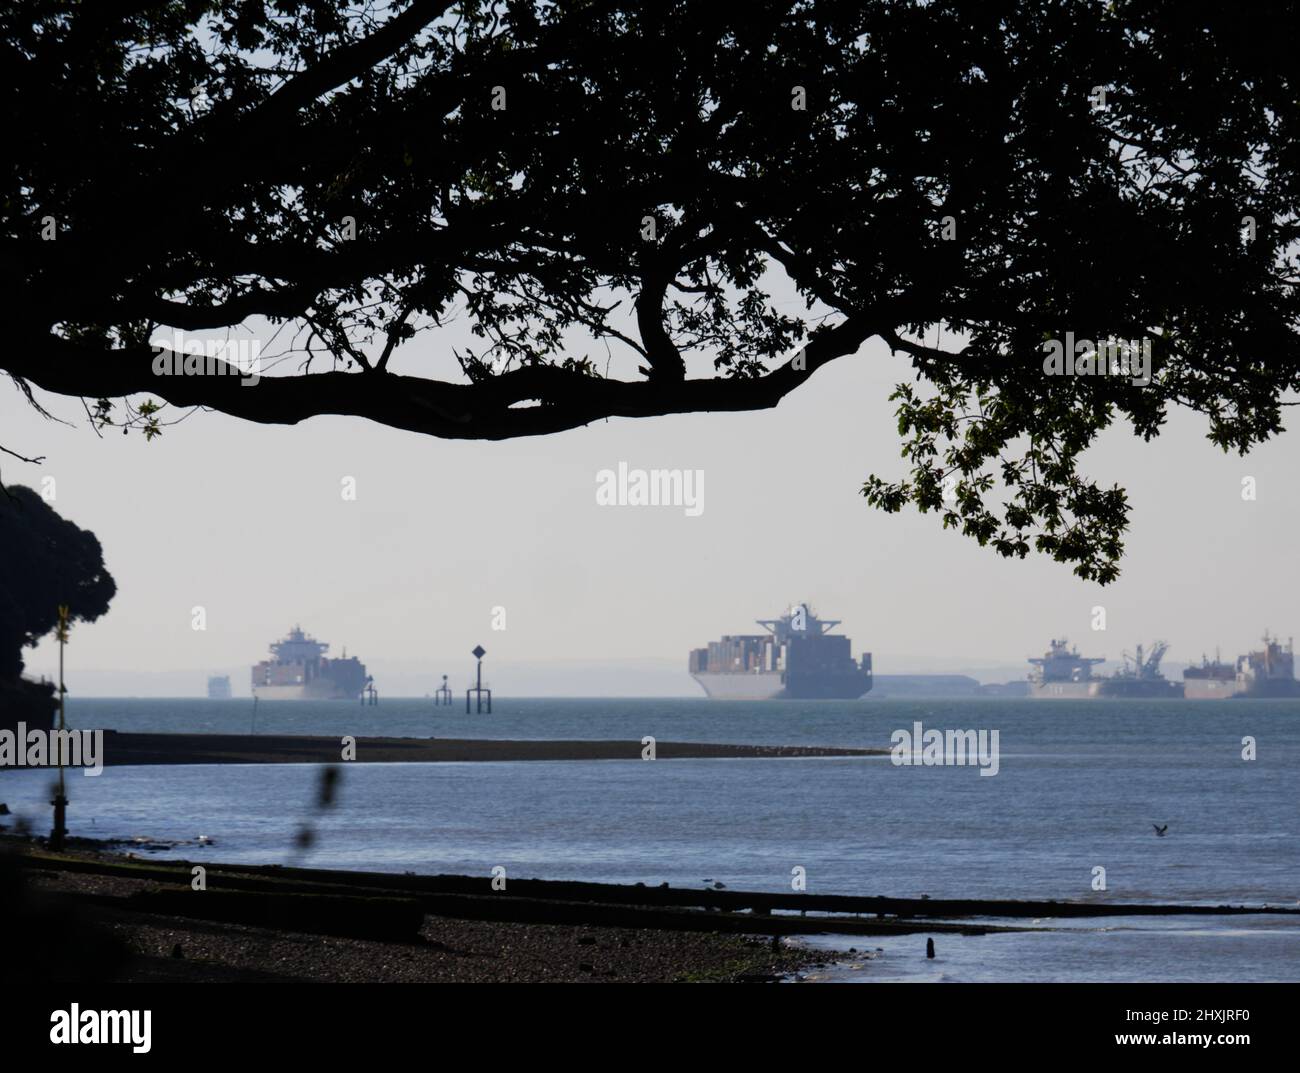 Oil tankers and container ships come and go at the entrance to Southampton Water and the Solent. Stock Photo